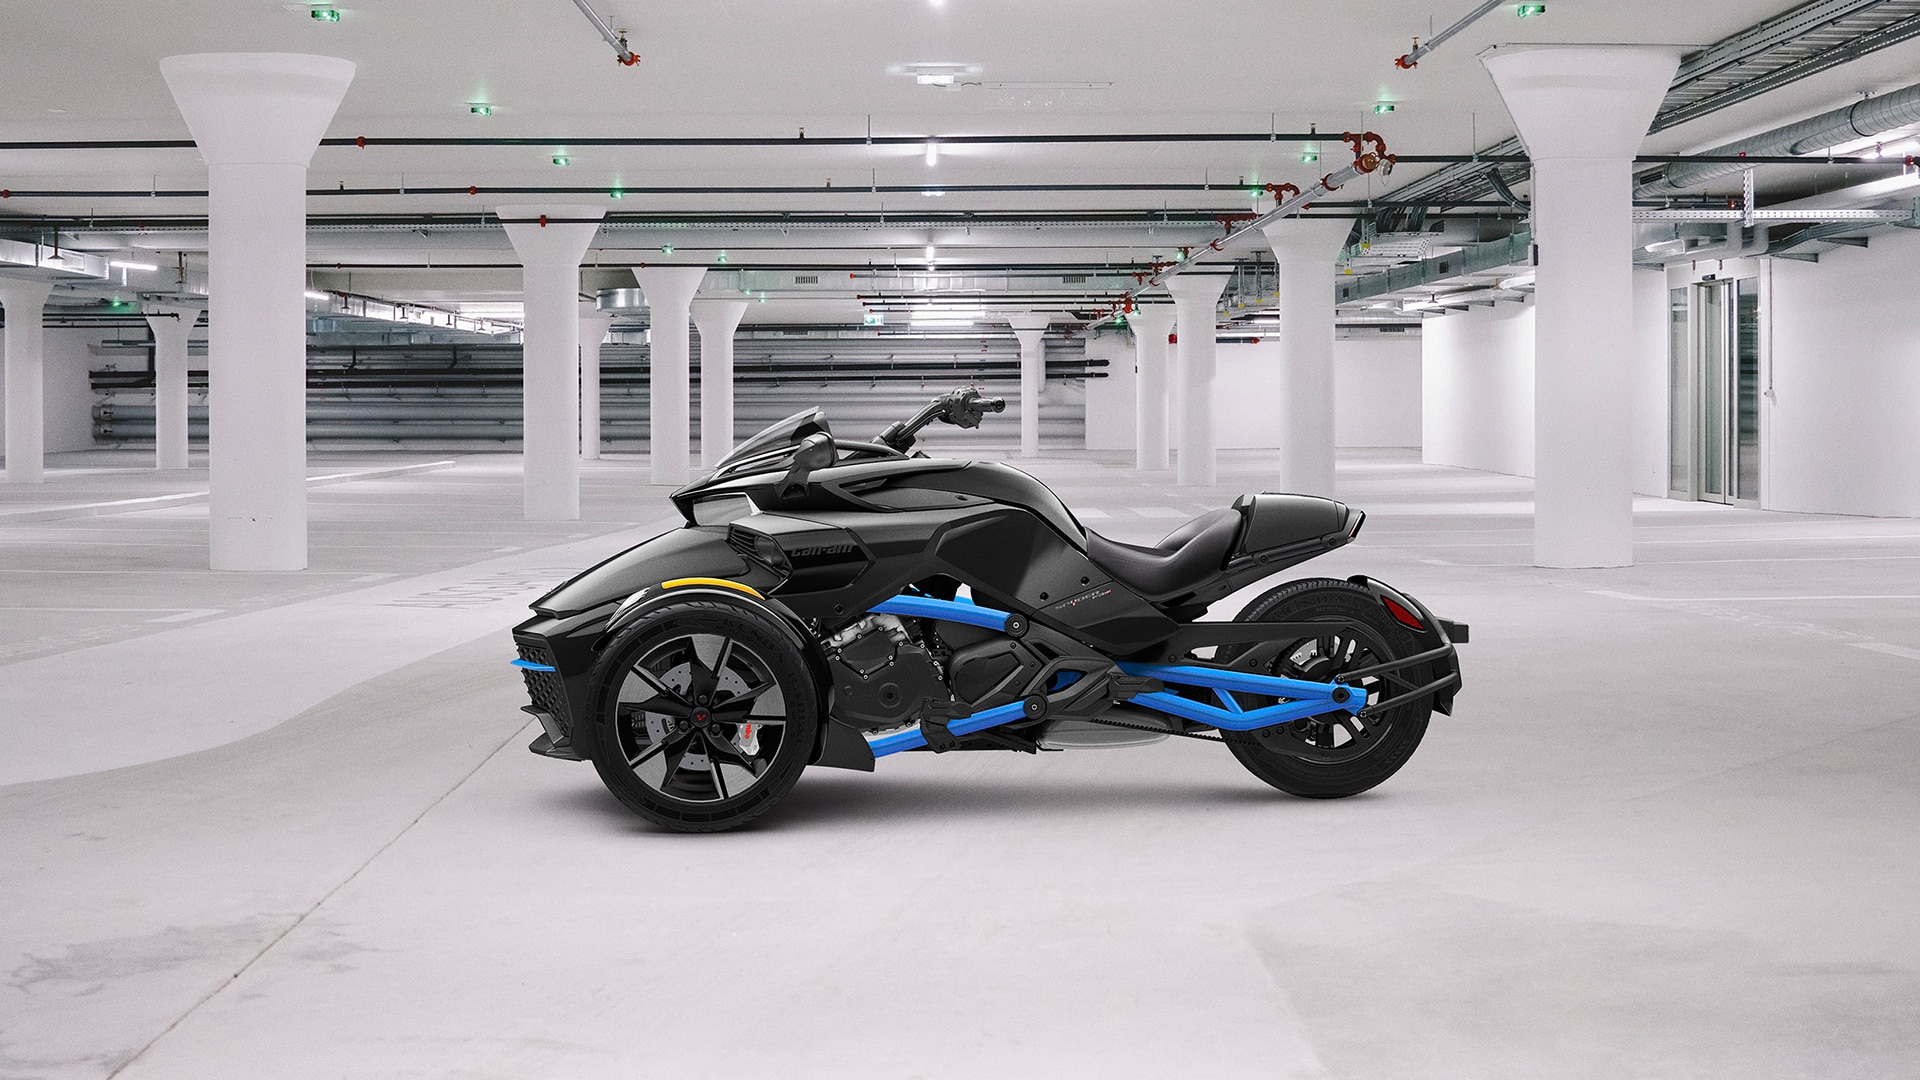 Can-Am Spyder F3-S-SS Monolith Black Satin in a garage